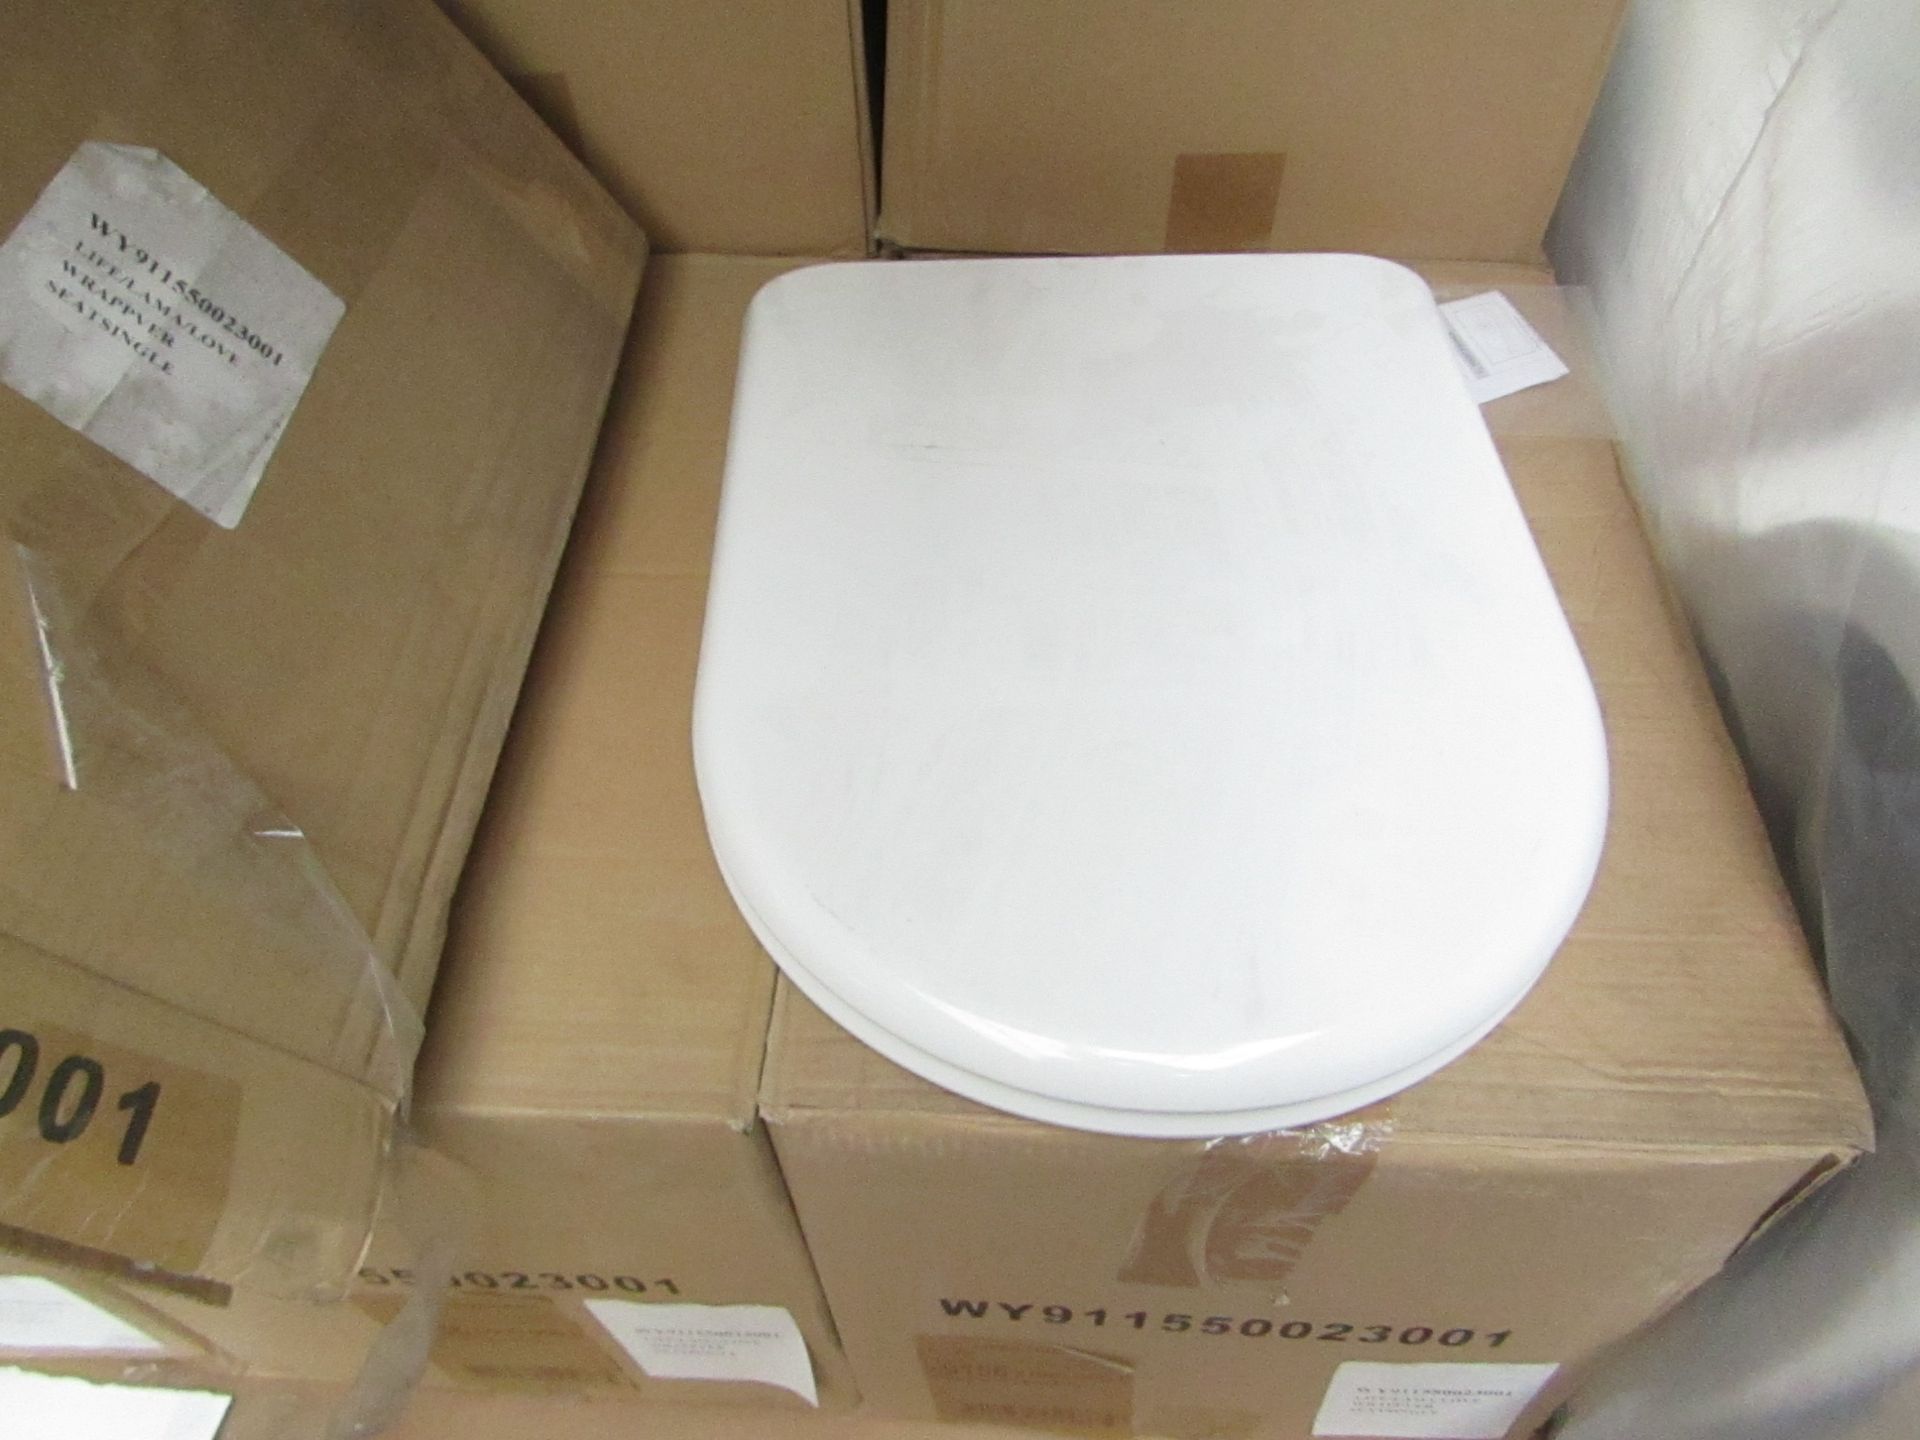 Laufen made toilet seat for Life/Love/Lama Models, model no. 89156 barcode 5704173255920 new and